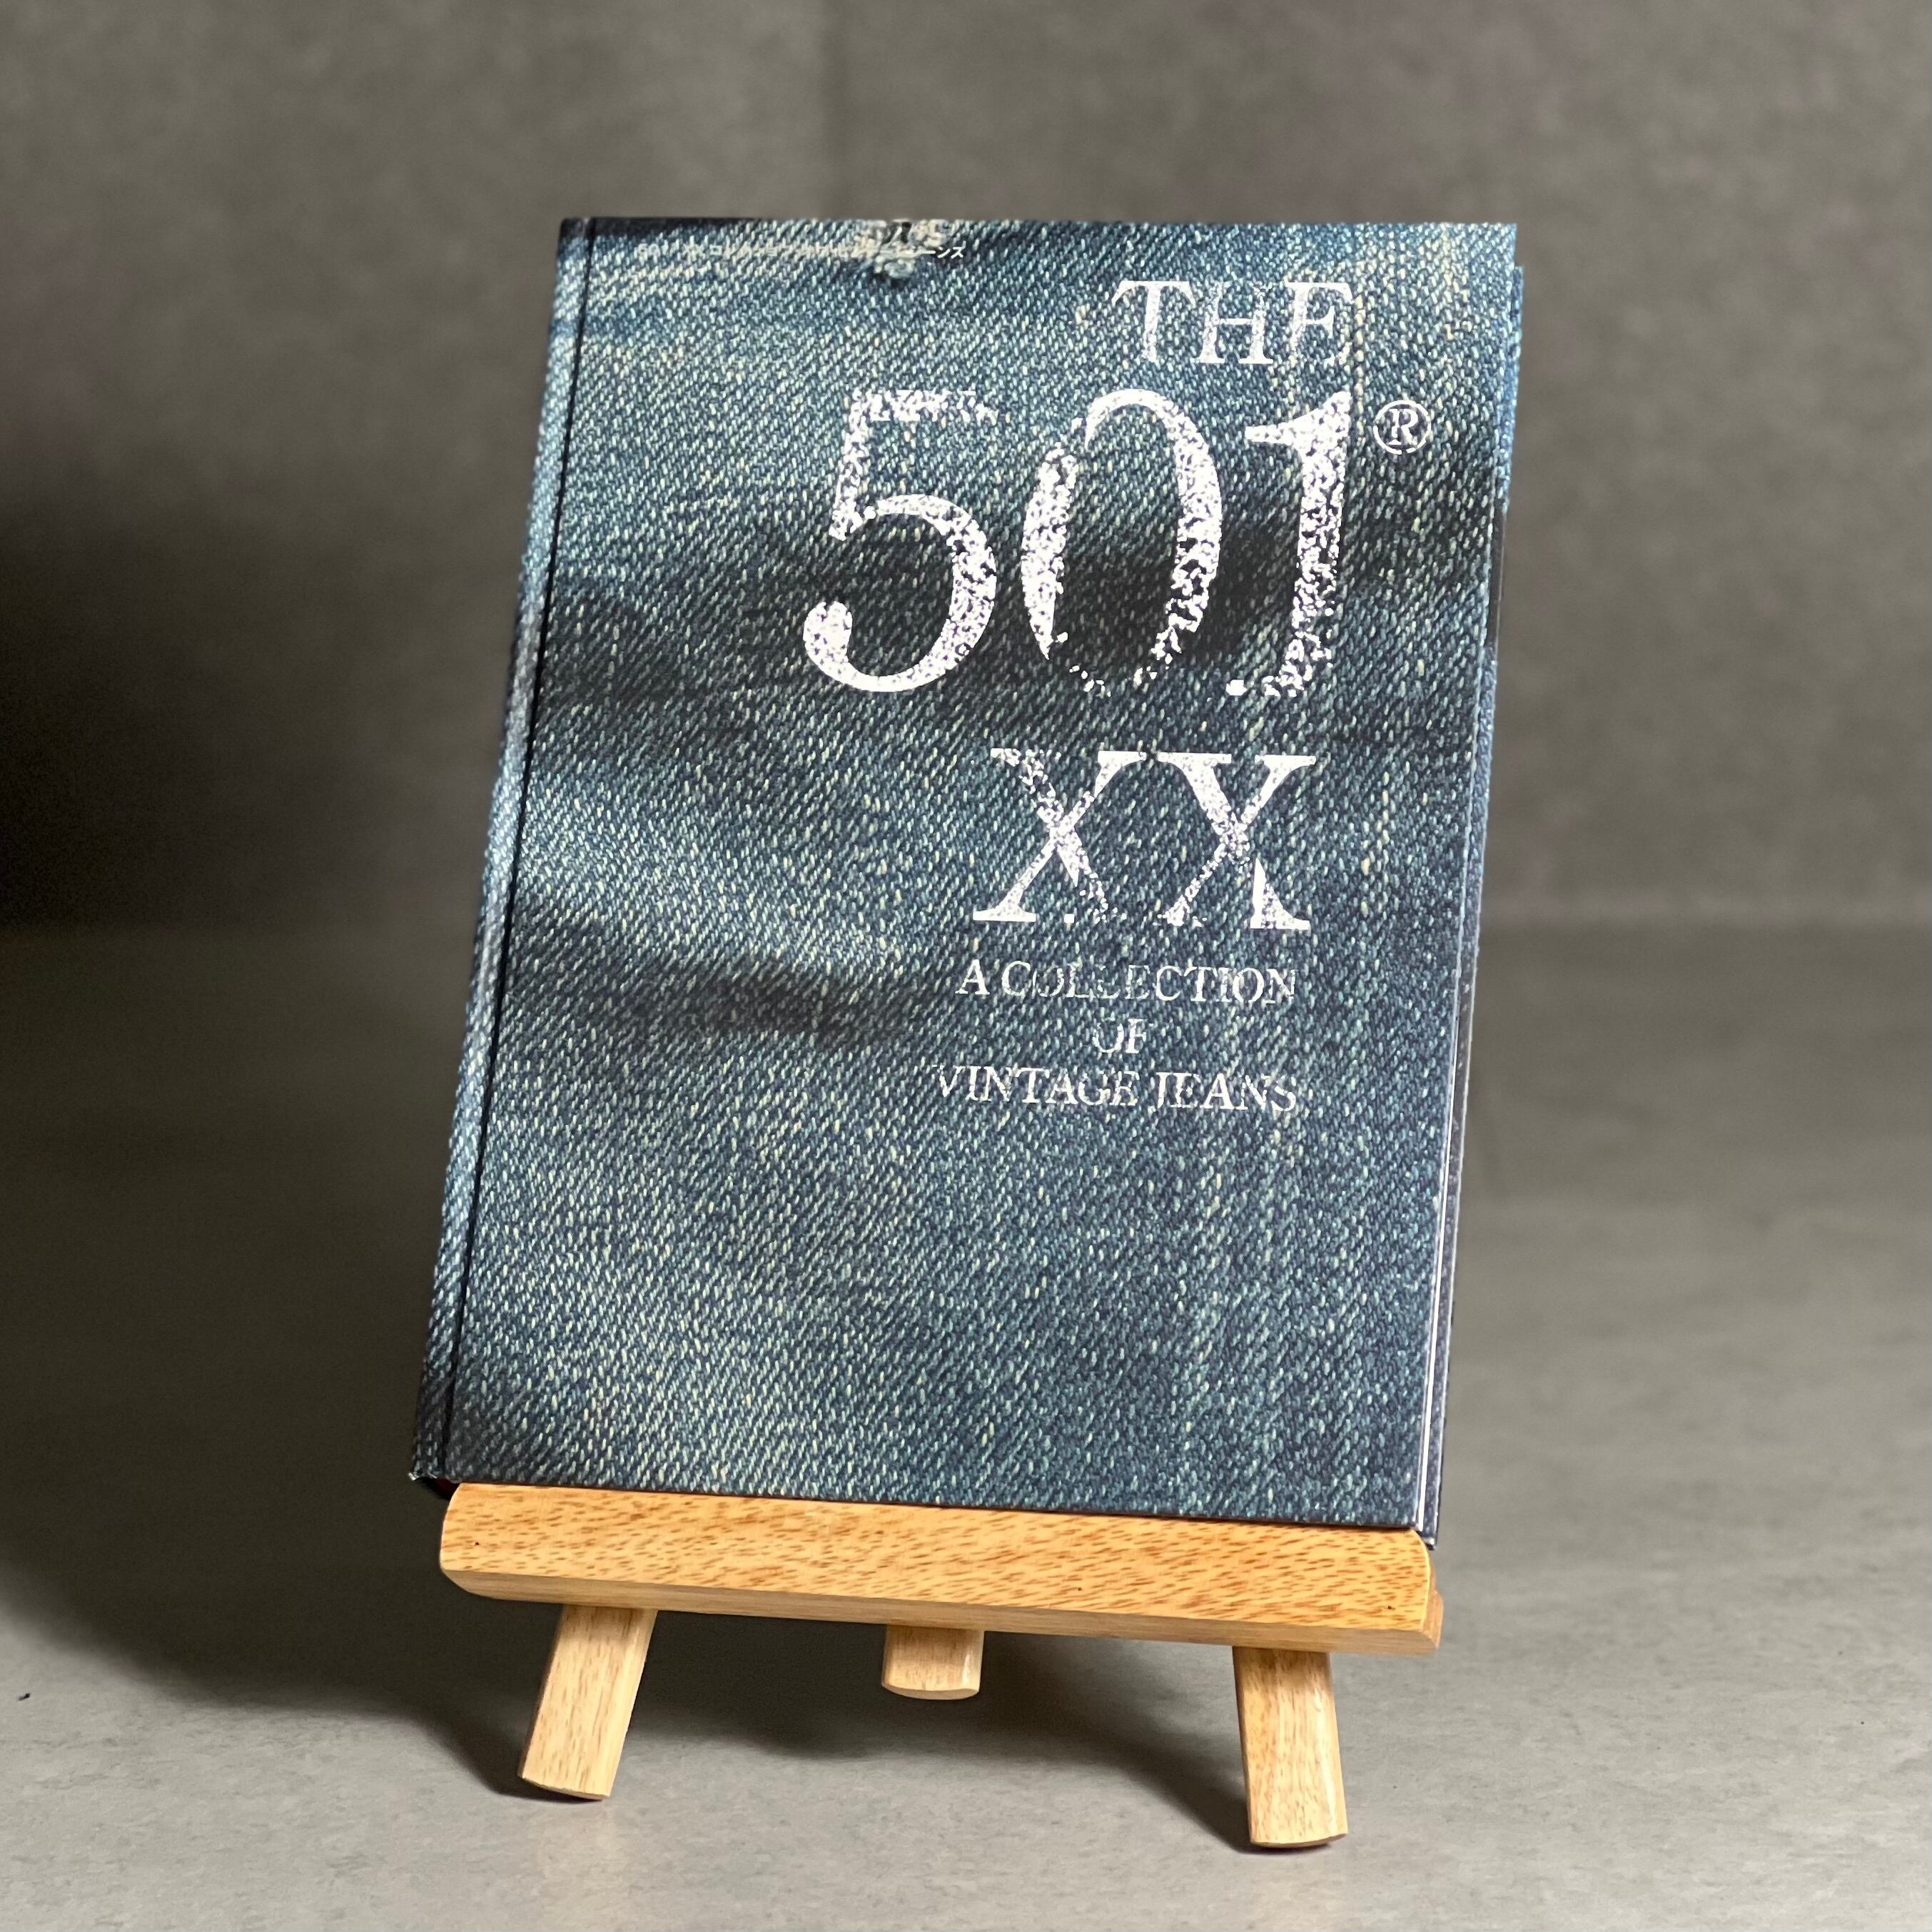 THE 501 XX A COLLECTION OF VINTAGE JEANS】〜501xxを世界一掘り下げ